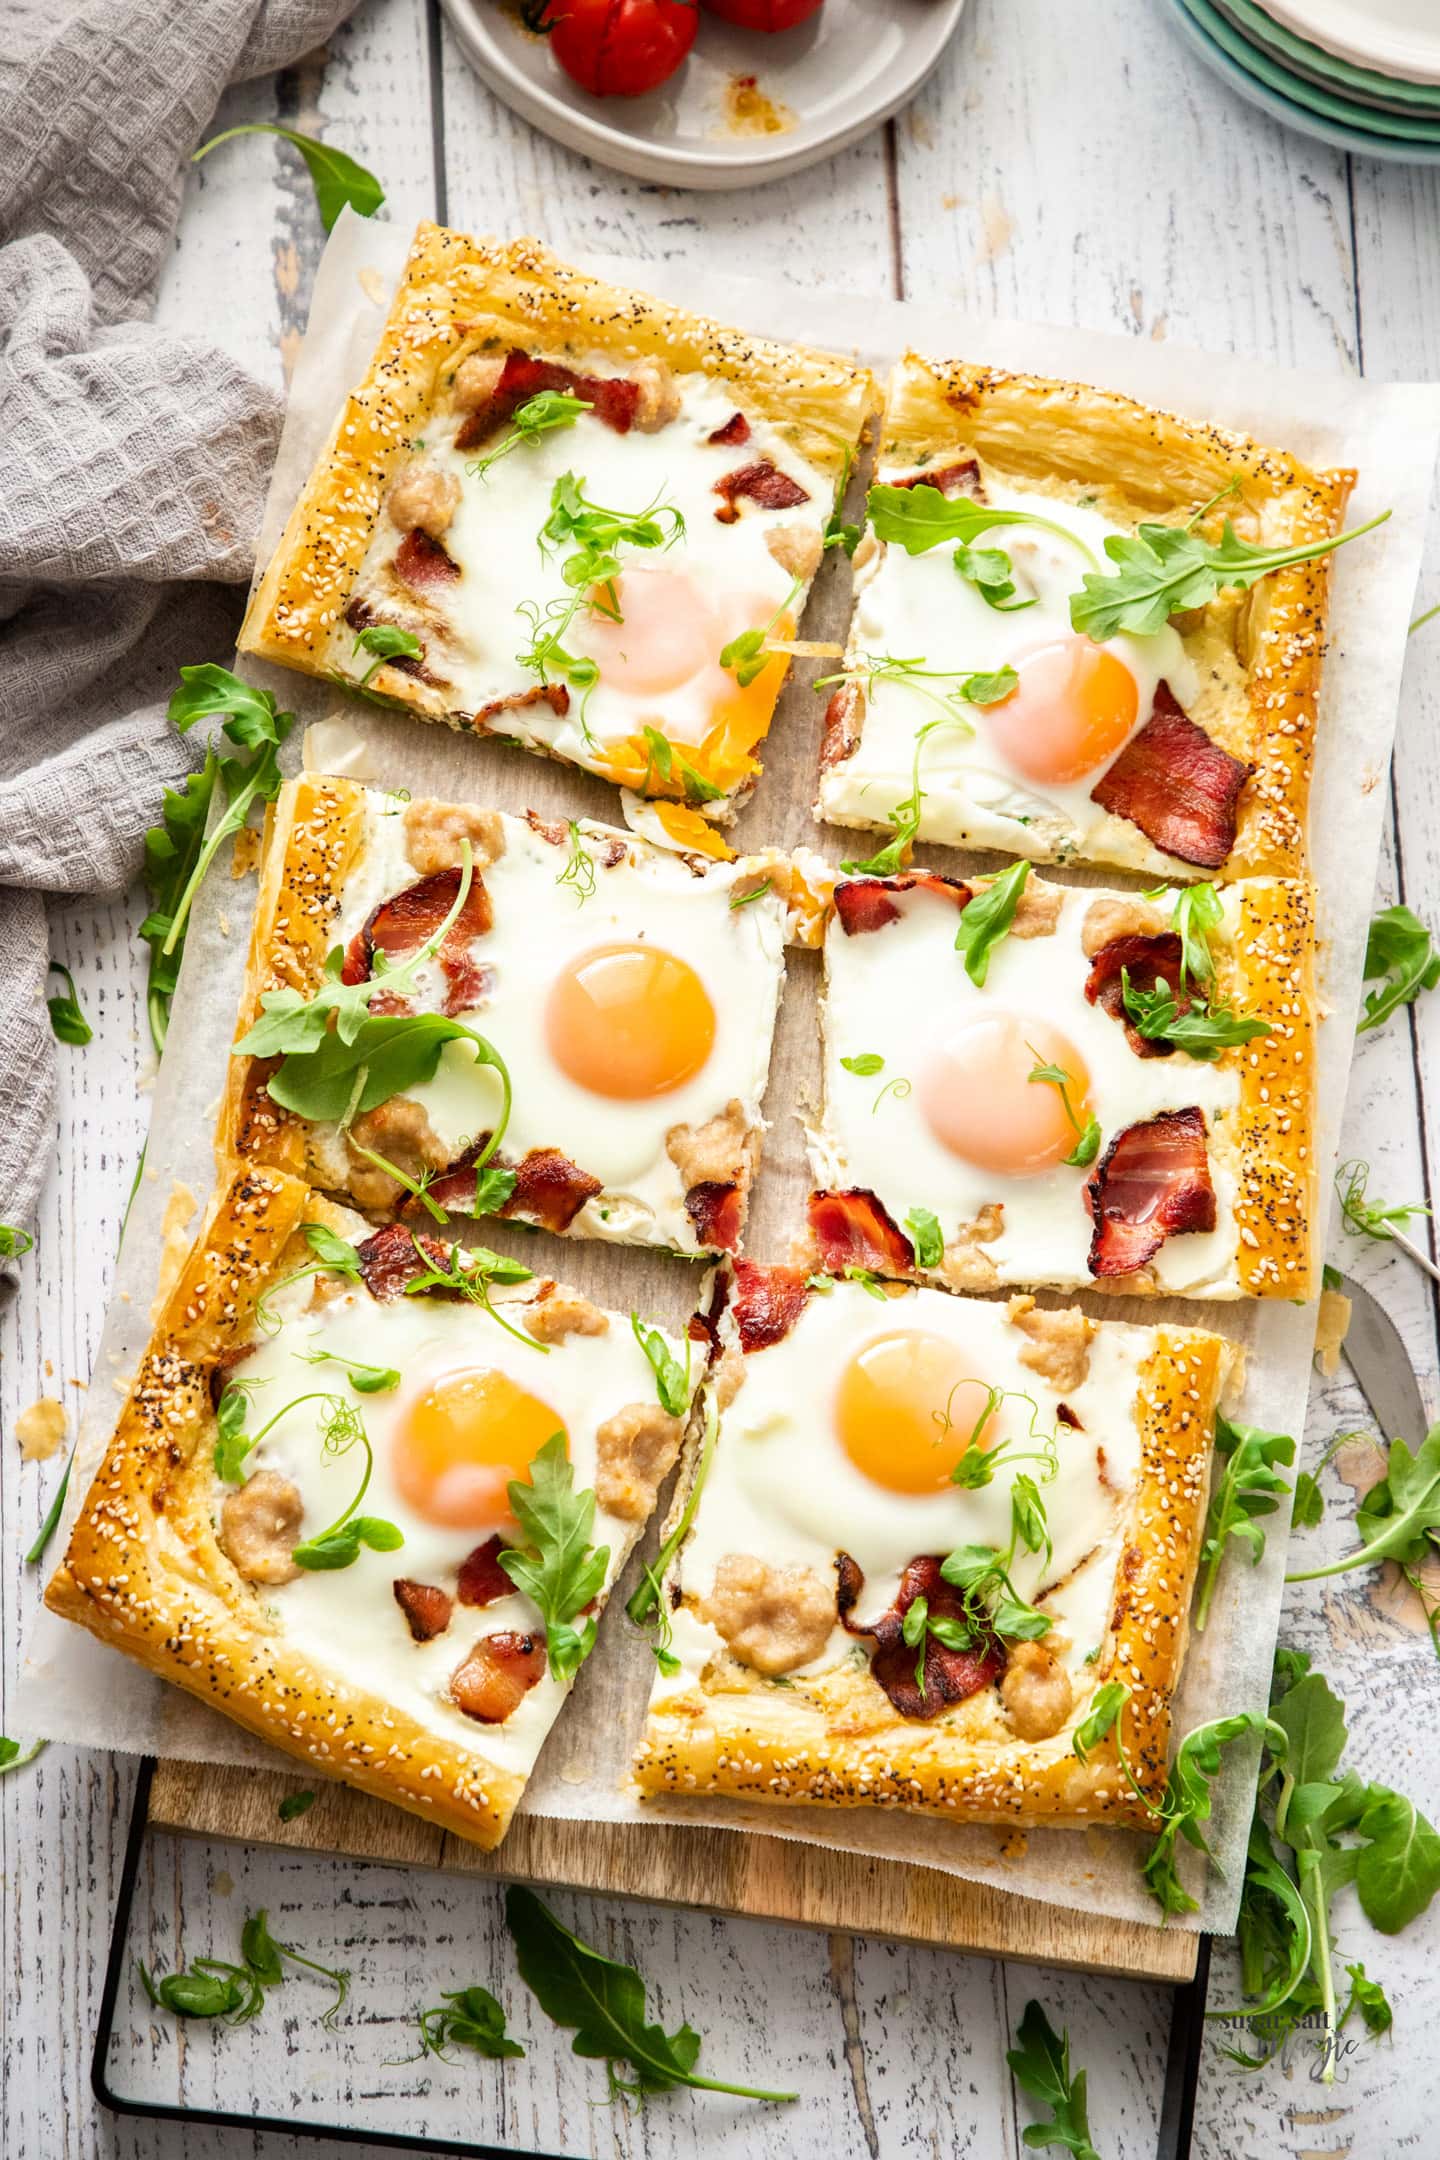 Top down view of a breakfast tart sliced into 6 pieces.